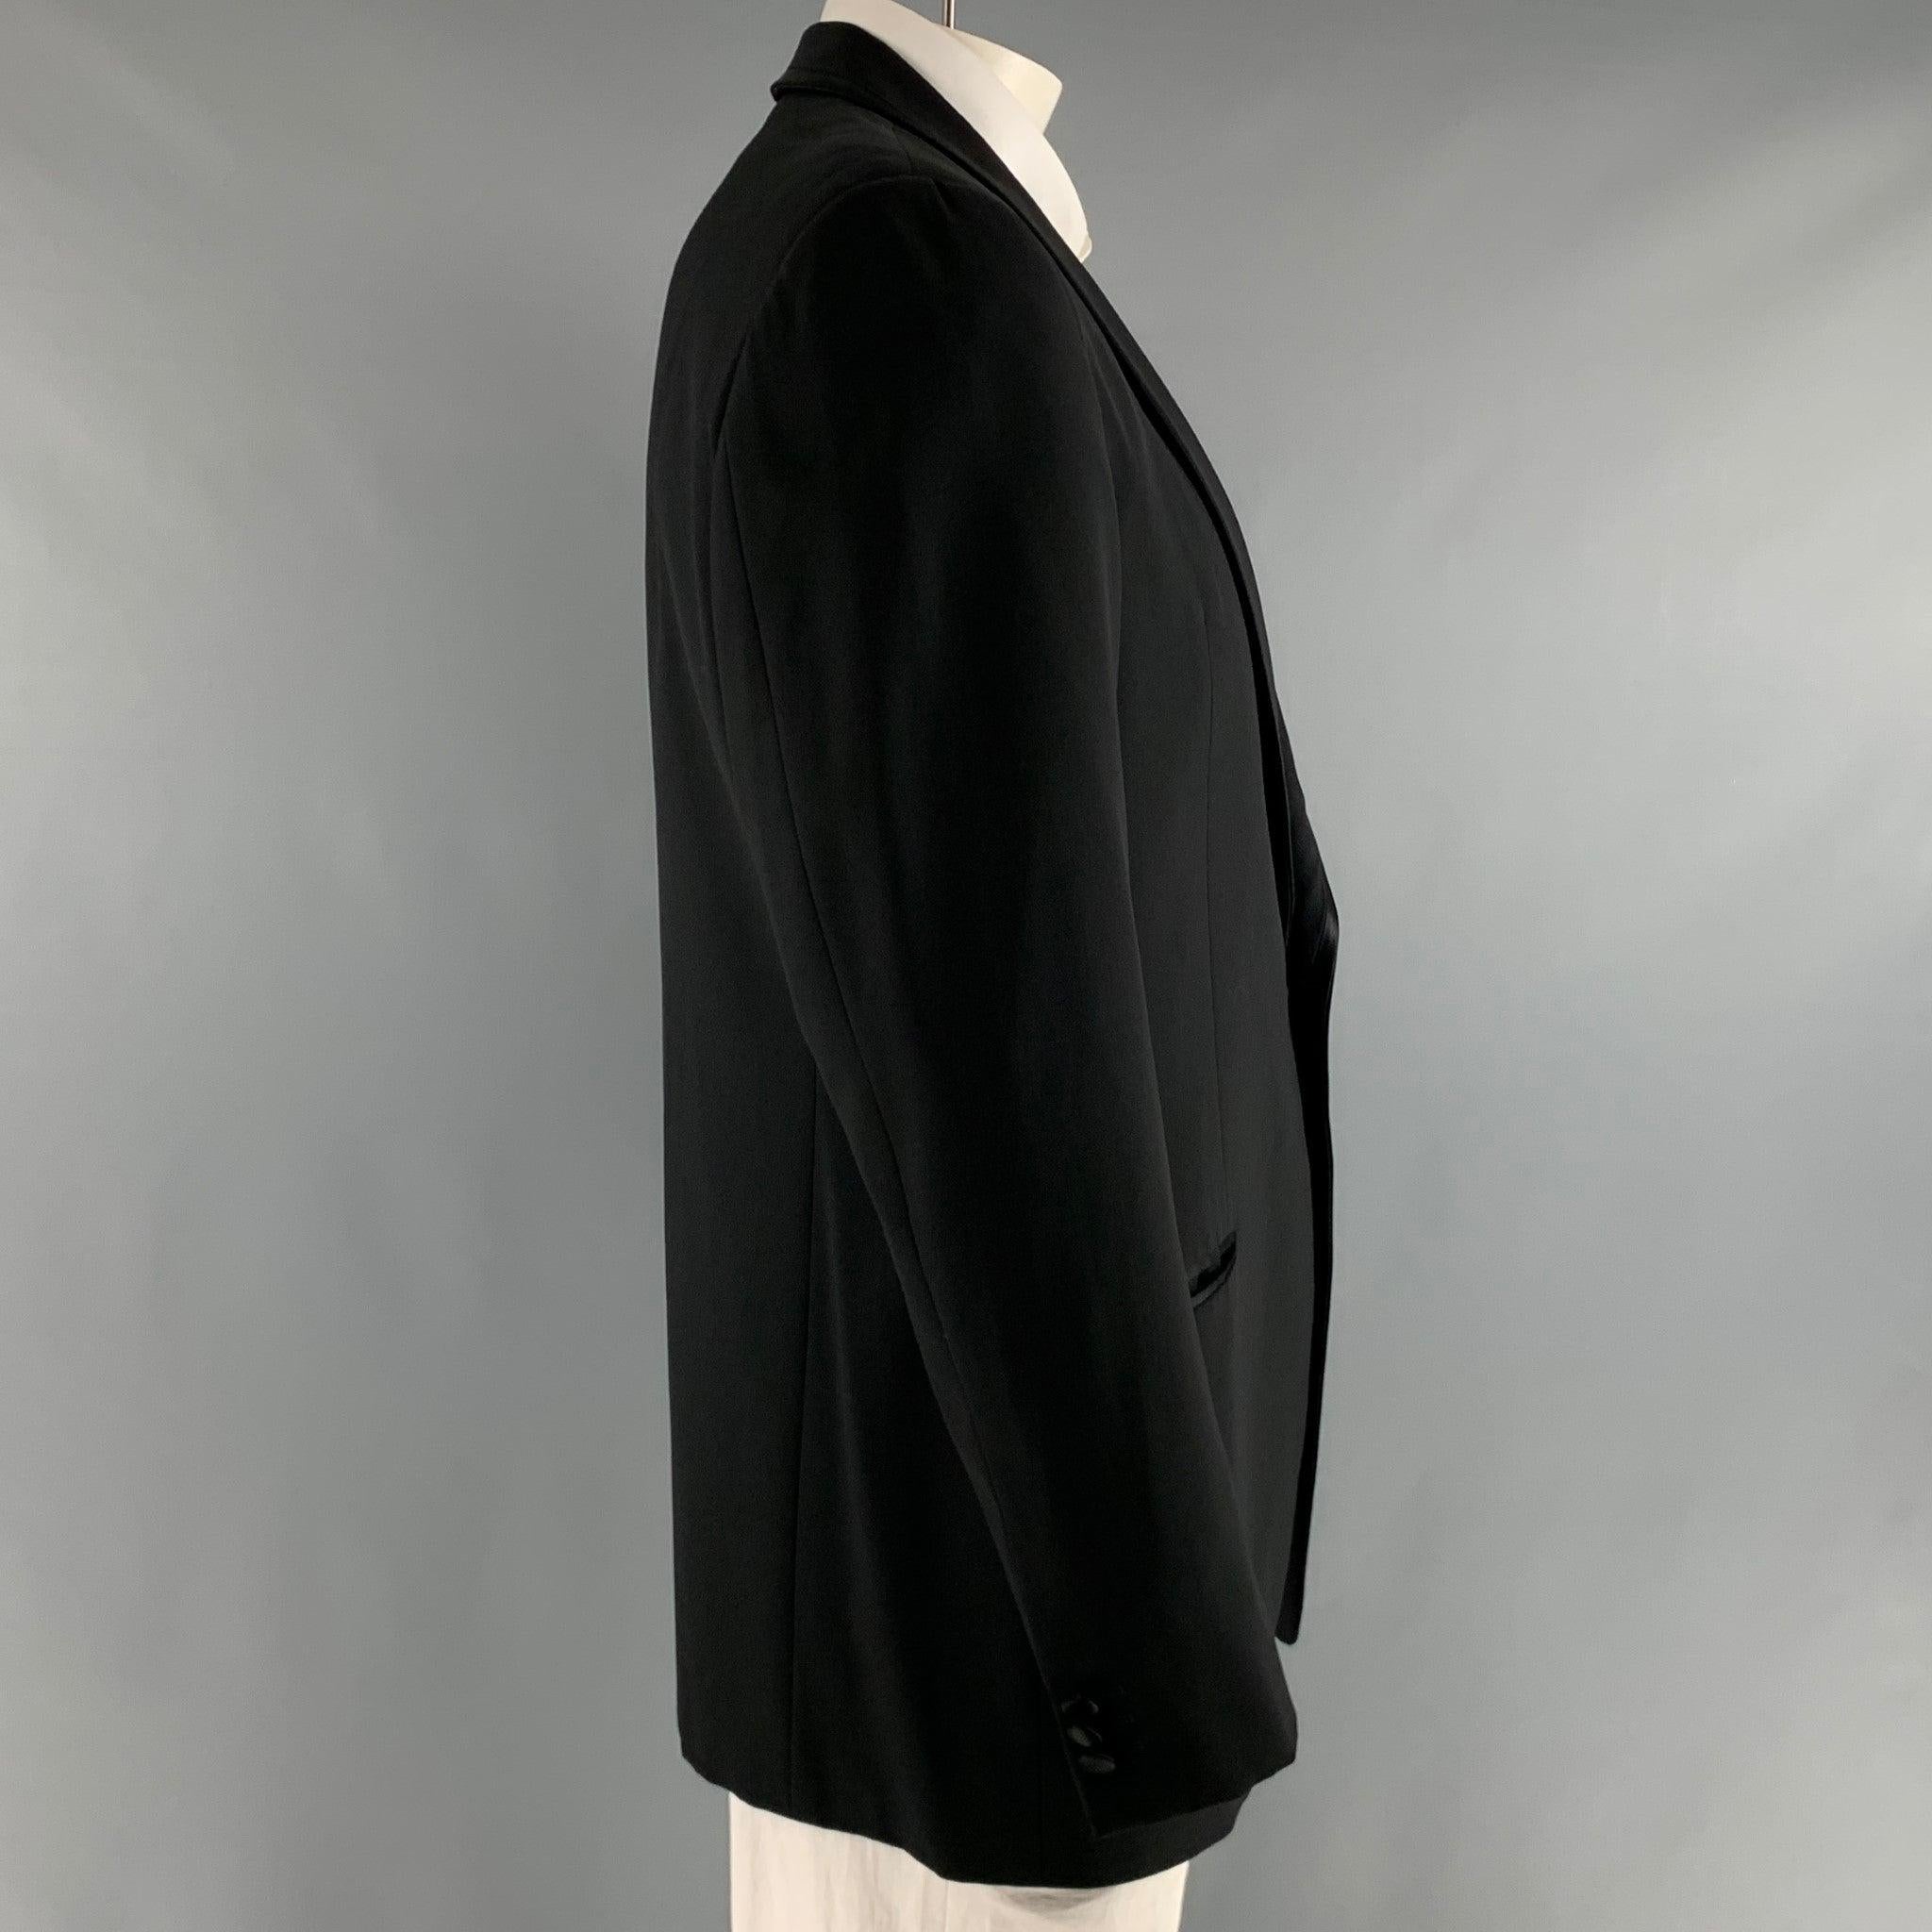 ARMANI COLLEZIONI sport coat comes in black wool woven material, with a full liner featuring a shawl collar, welt pockets, single button closure, single breasted. Made in Italy.Excellent Pre-Owned Condition. 

Marked:   42 R 

Measurements: 
